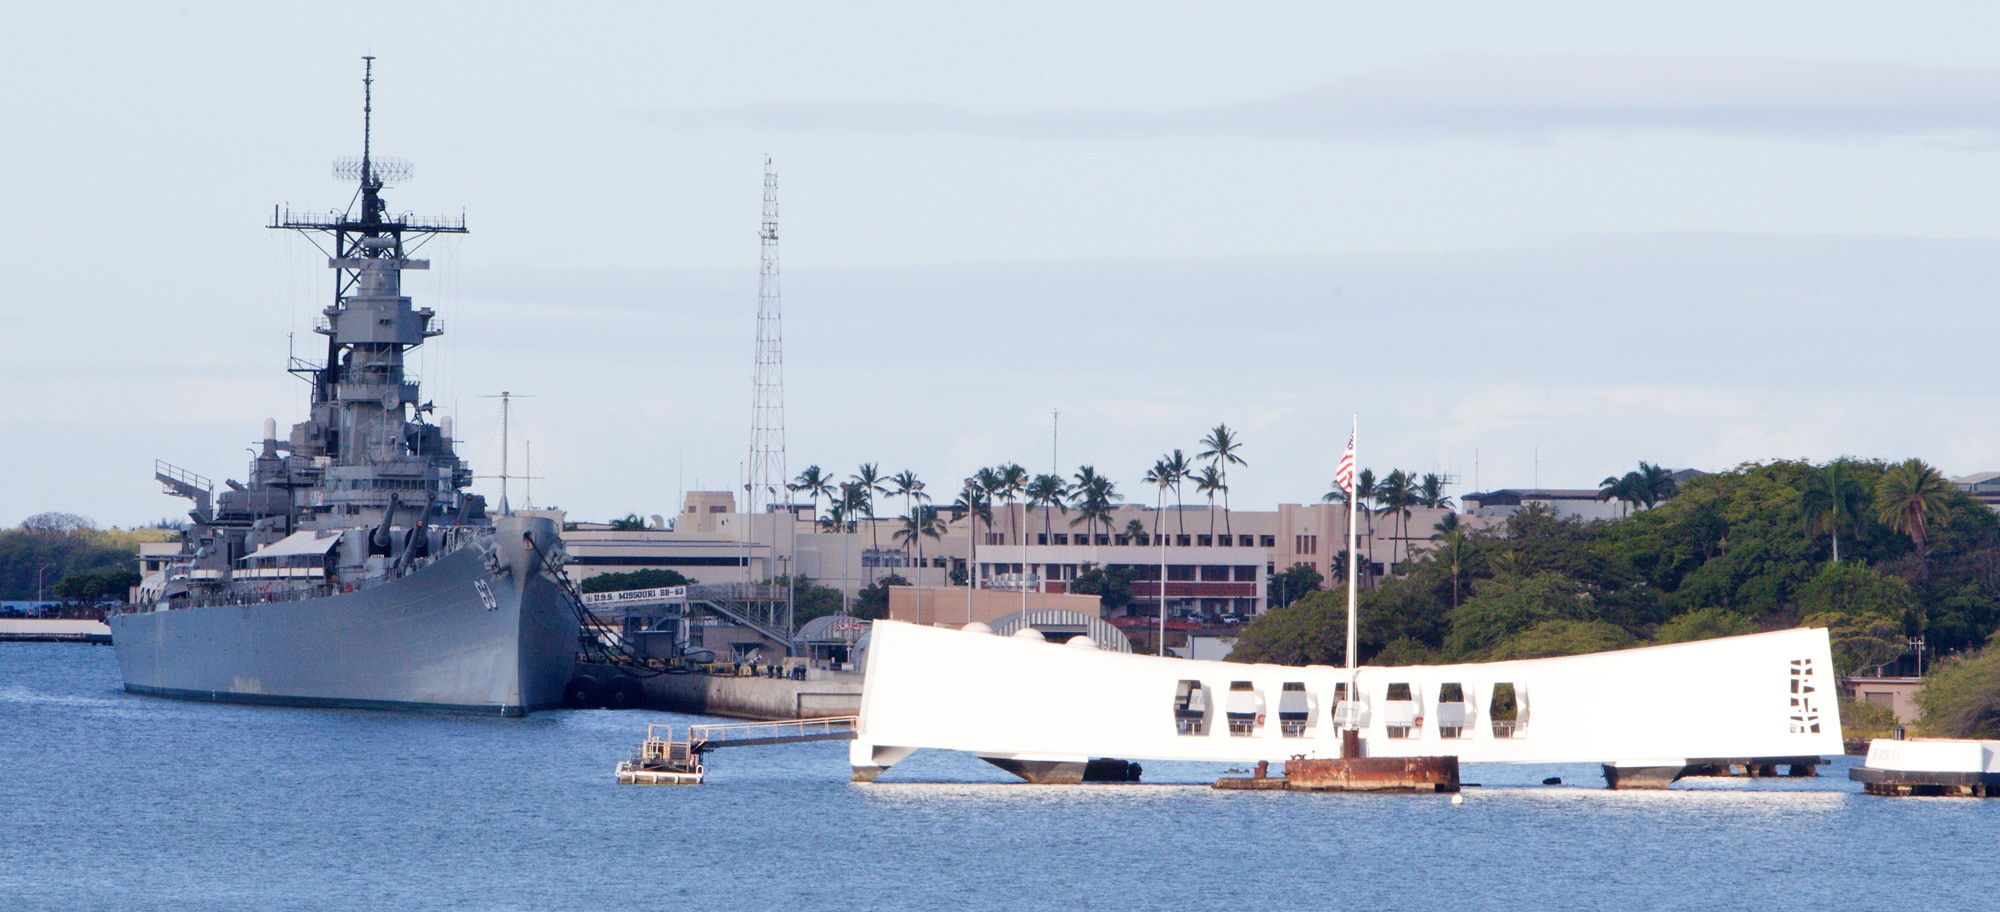 At Pearl Harbor, Hawaii, the broad geometric U S S Arizona Memorial is situated in the water beside the battleship U S S Missouri, which is docked at the pier